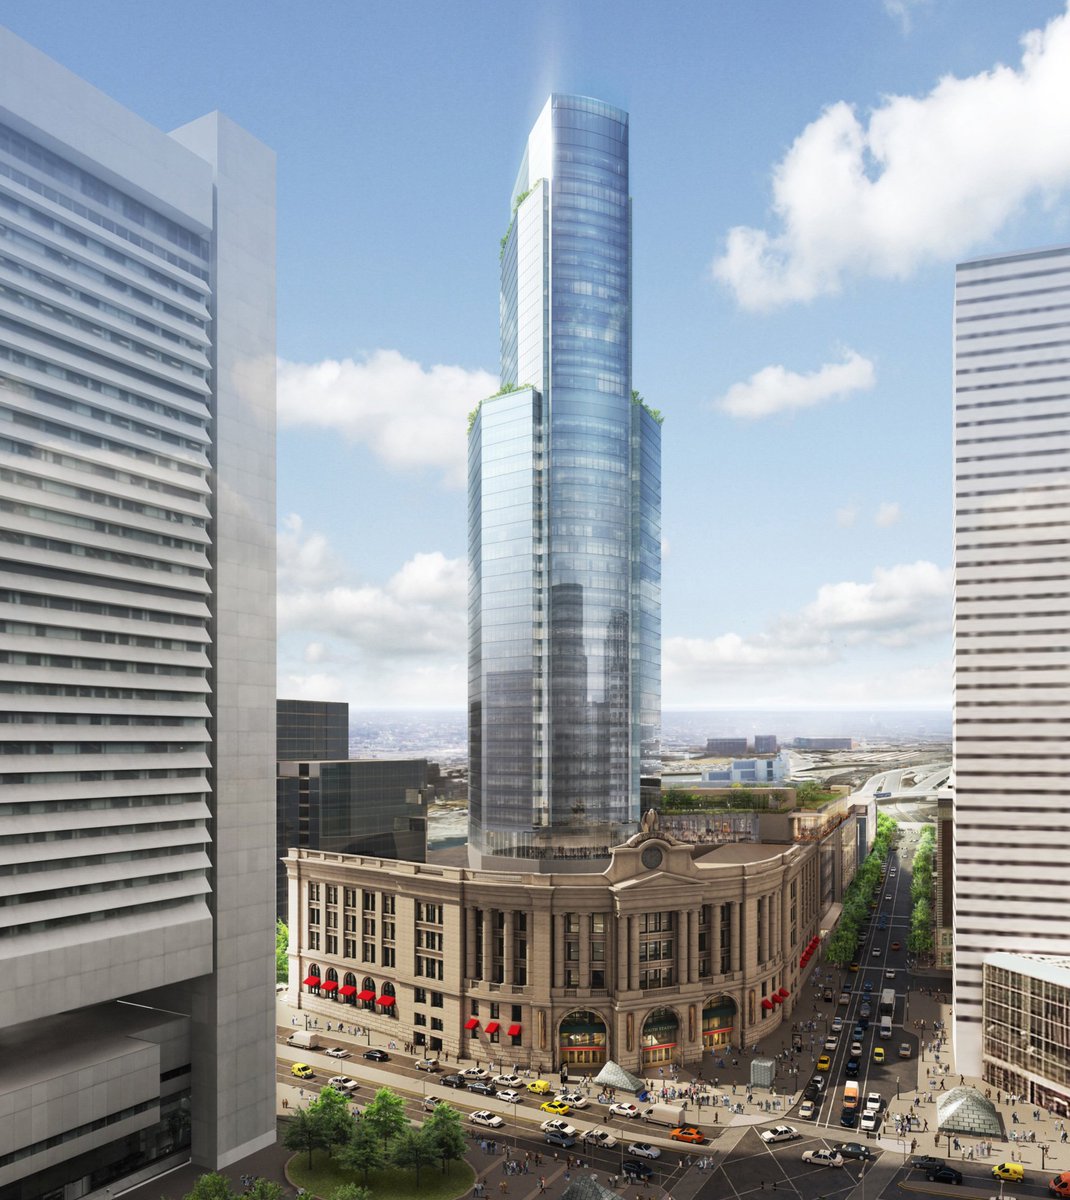 @Chartx77 @realpolity101 My problem with most IR station redevelopments is, why don't you aspire to build office skyscrapers over your stations
don't you know how much that peak TOD would earn you, not to forget benefit the city's economy?
Need to learn from boston & Seawoods!